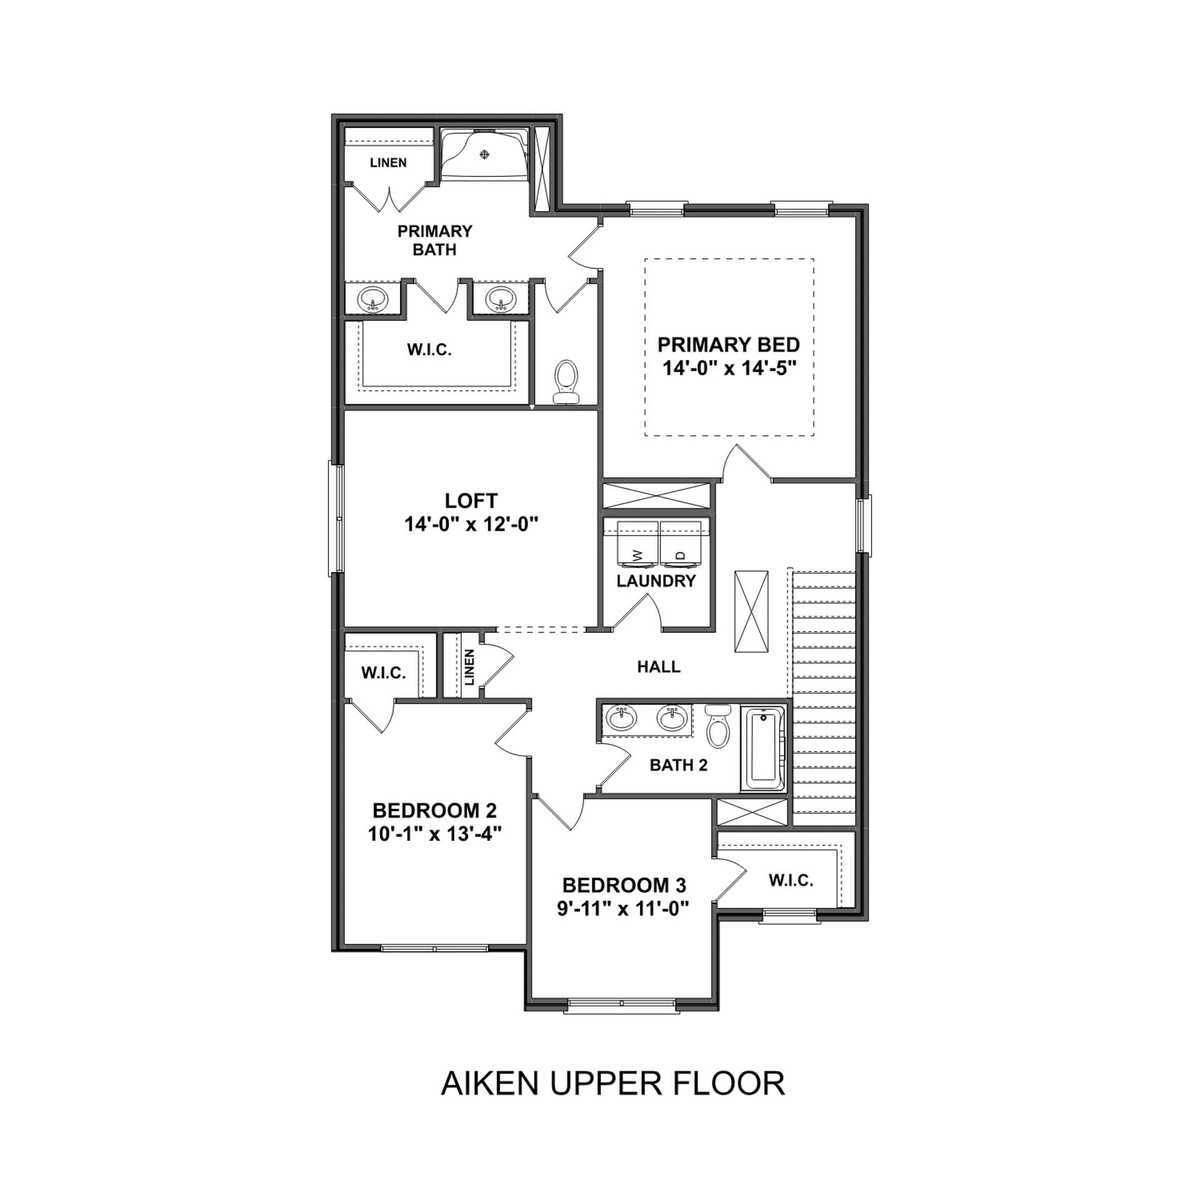 2 - The Aiken floor plan layout for 213 Sunny Springs Court in Davidson Homes' Flint Meadows community.